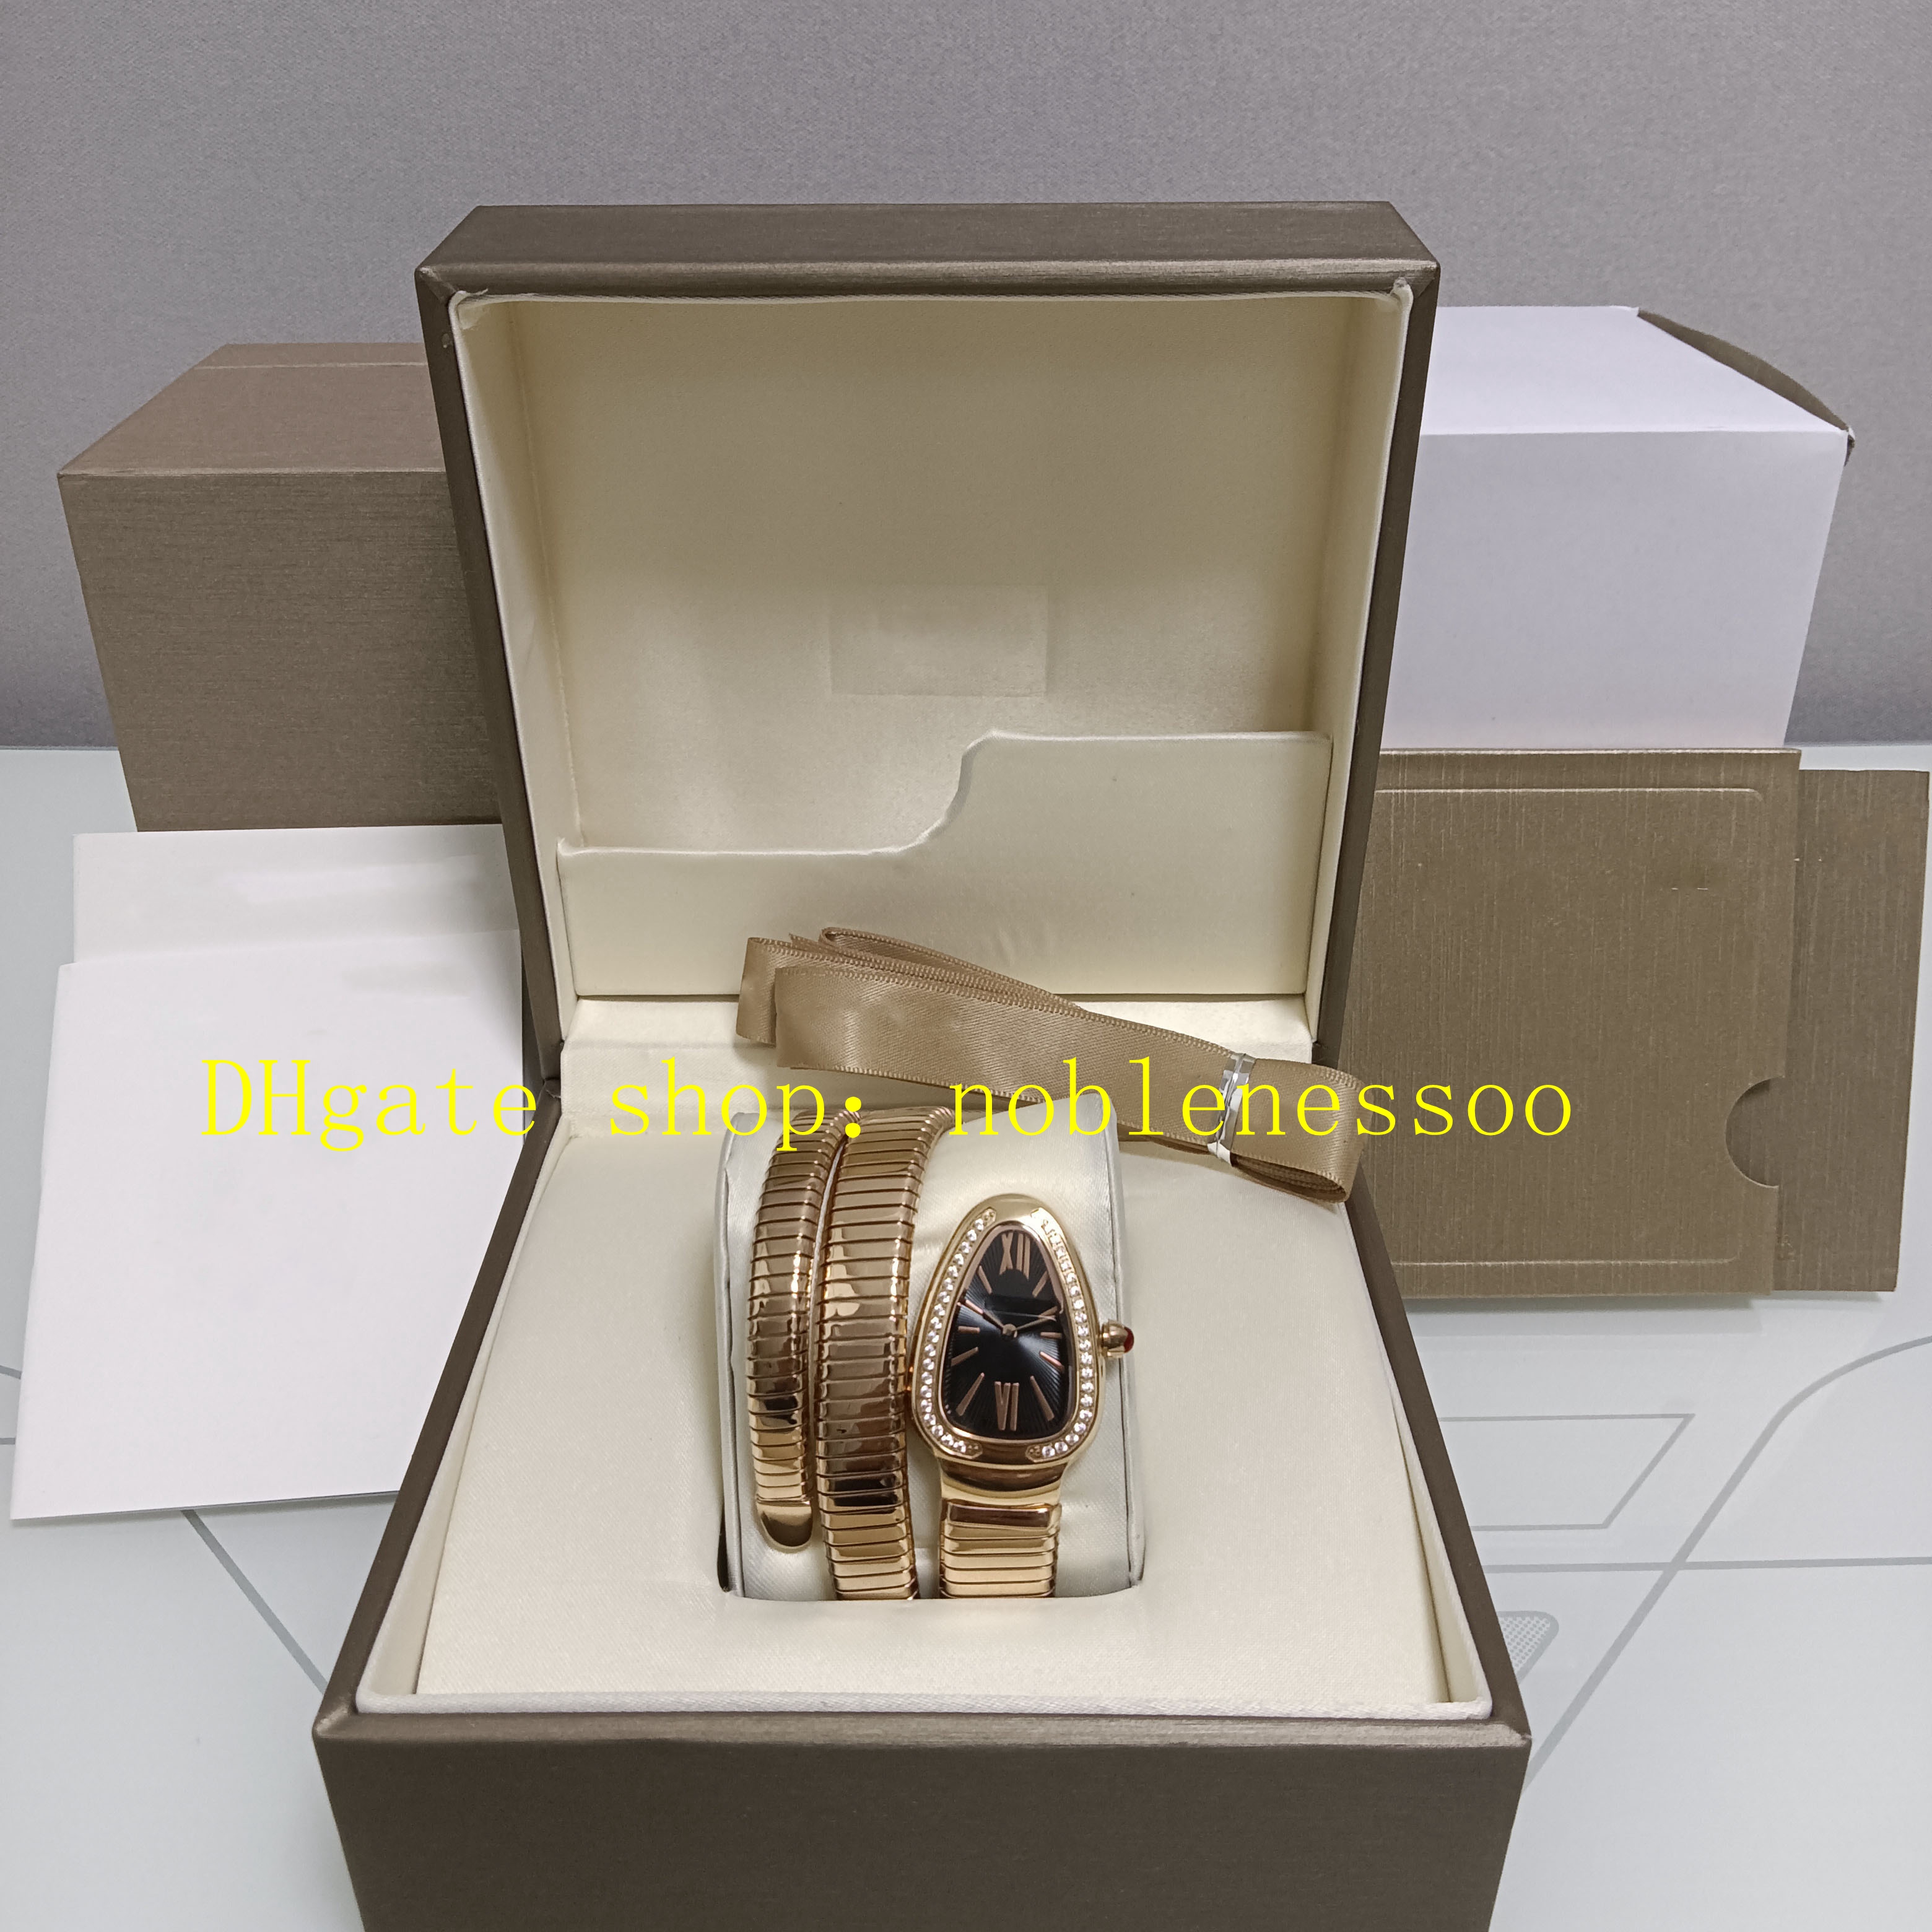 Image of 3 Color Ladies With Box Papers Watches Women Quartz Black Dial Diamond Bezel Tubogas Serpenti 101911 Casual Dress 18K Rose Gold Everose Wome